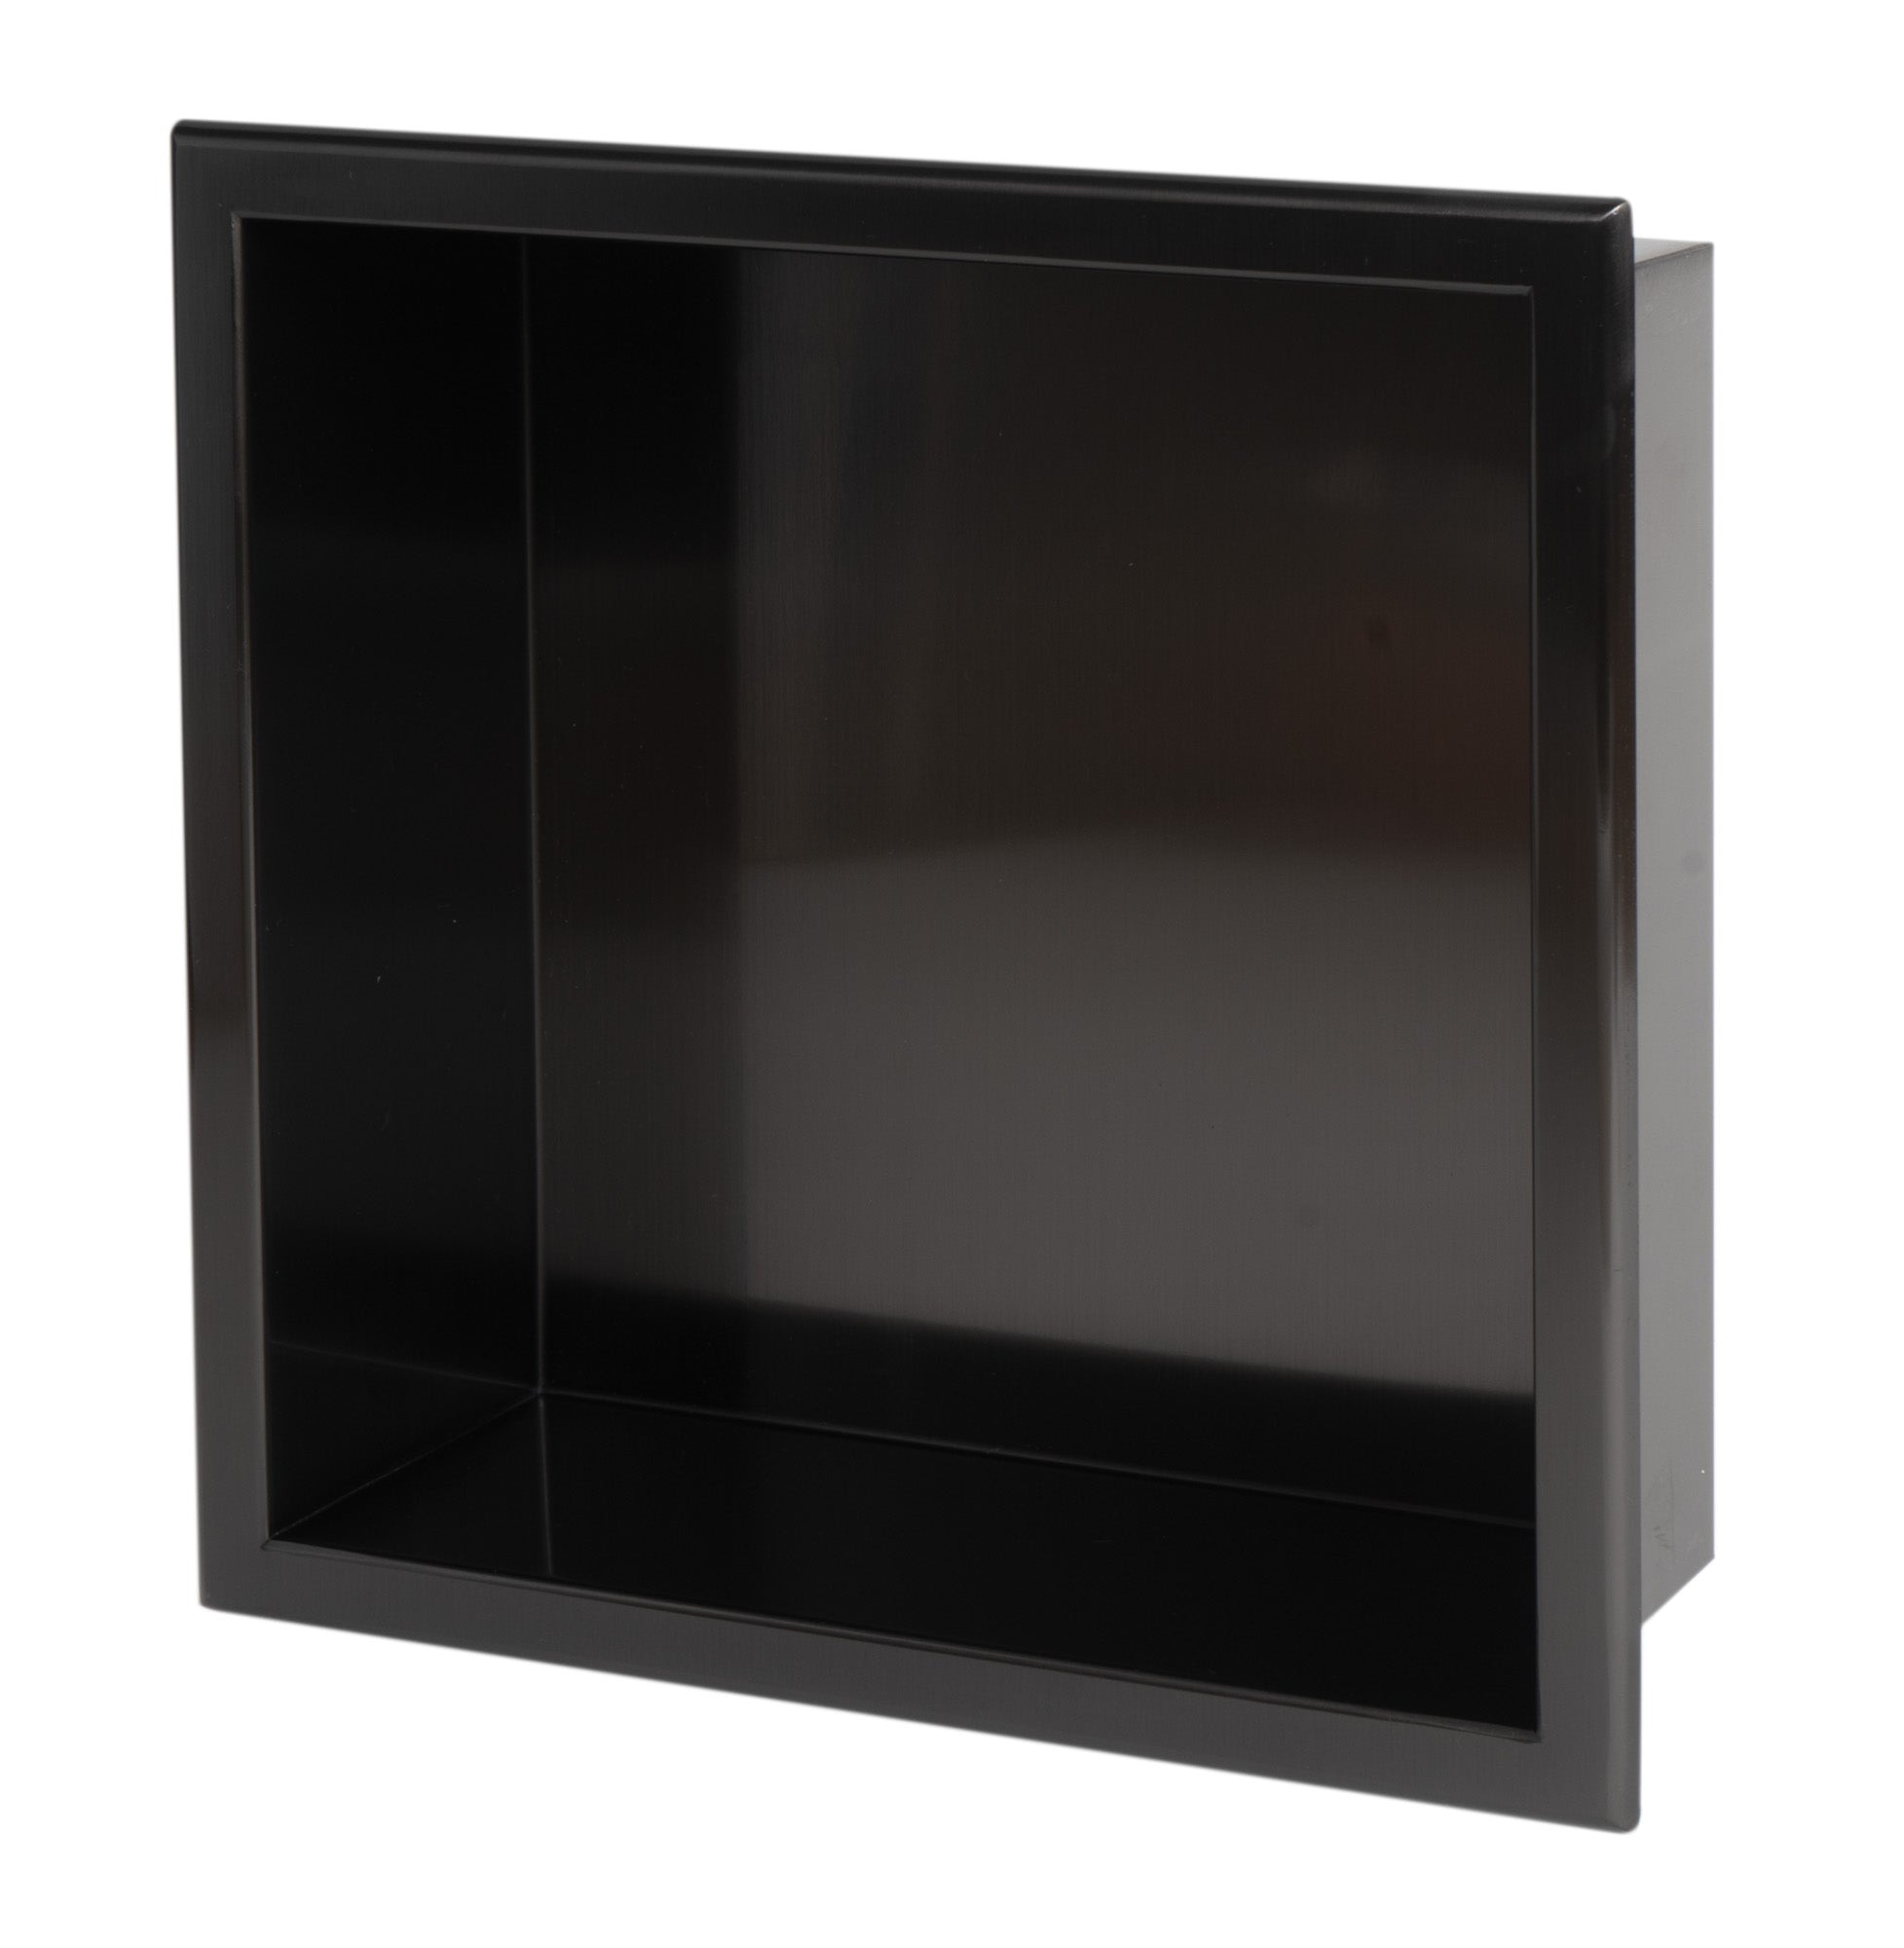 ALFI brand ABNP1212-BB 12Inch x 12Inch Brushed Black PVD Stainless Steel Square Single Shelf Shower Niche